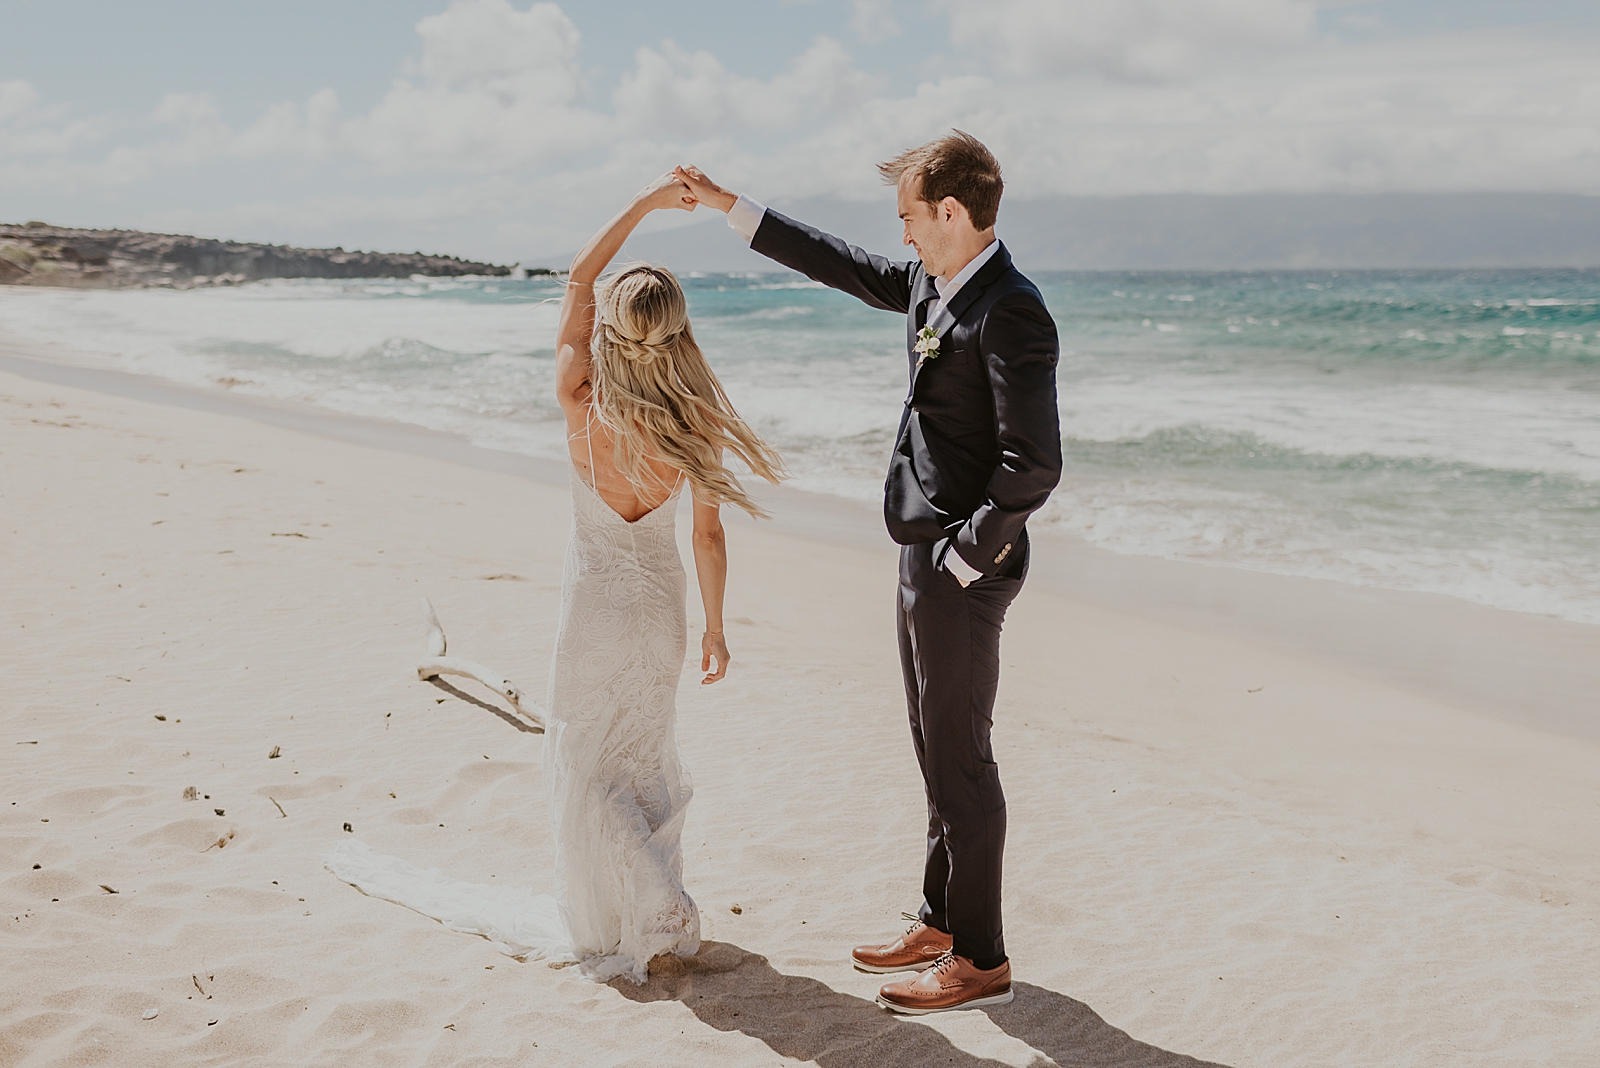 Bride twirling by Groom's hand on the sand of the beach